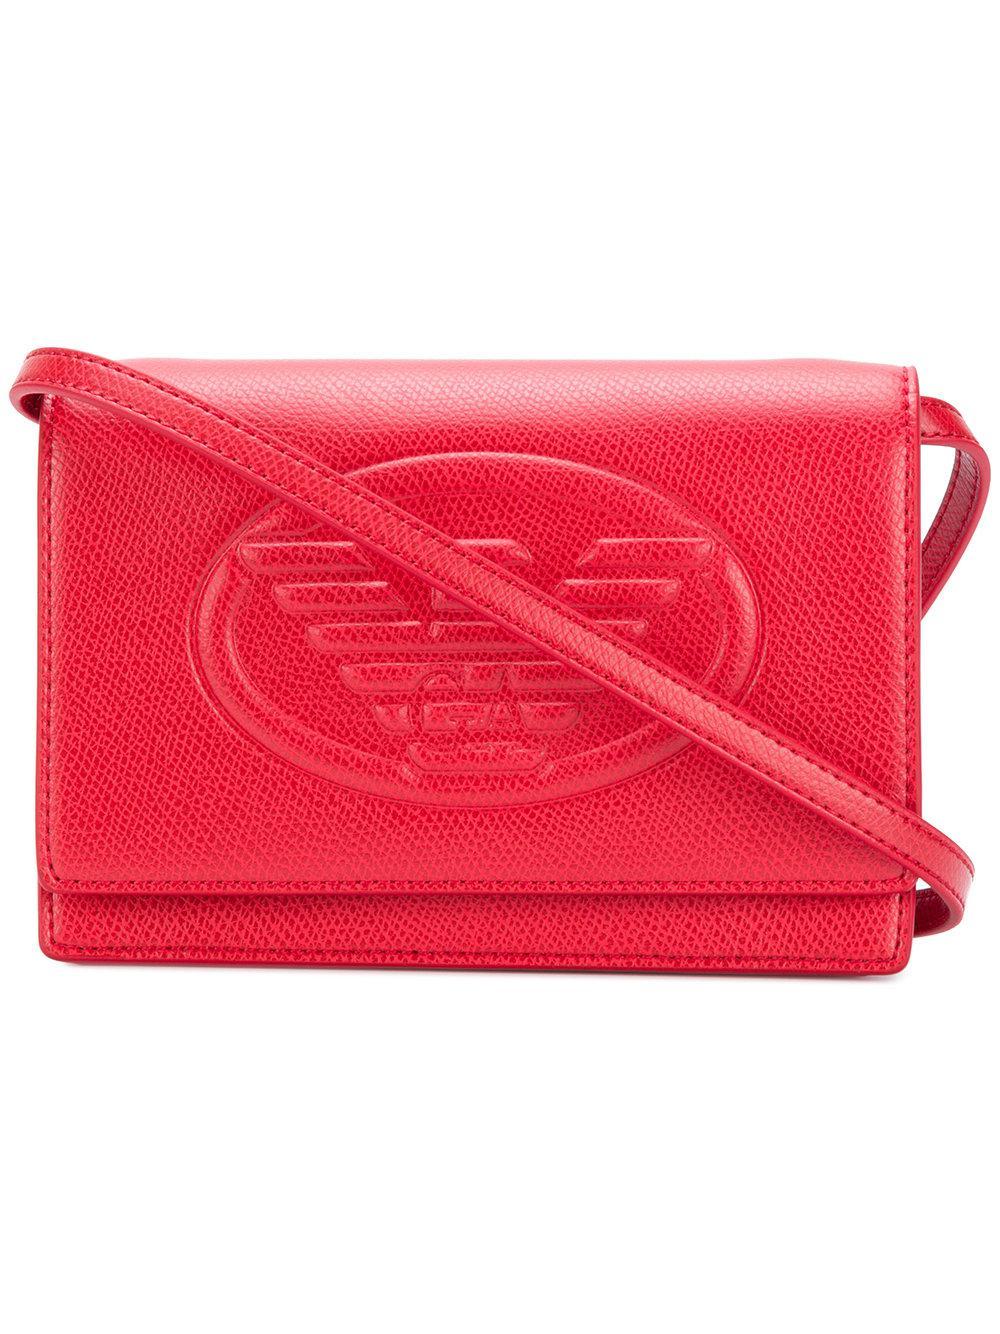 Red Cross Bag Logo - Emporio Armani Crossbody Bag With Logo in Red - Lyst